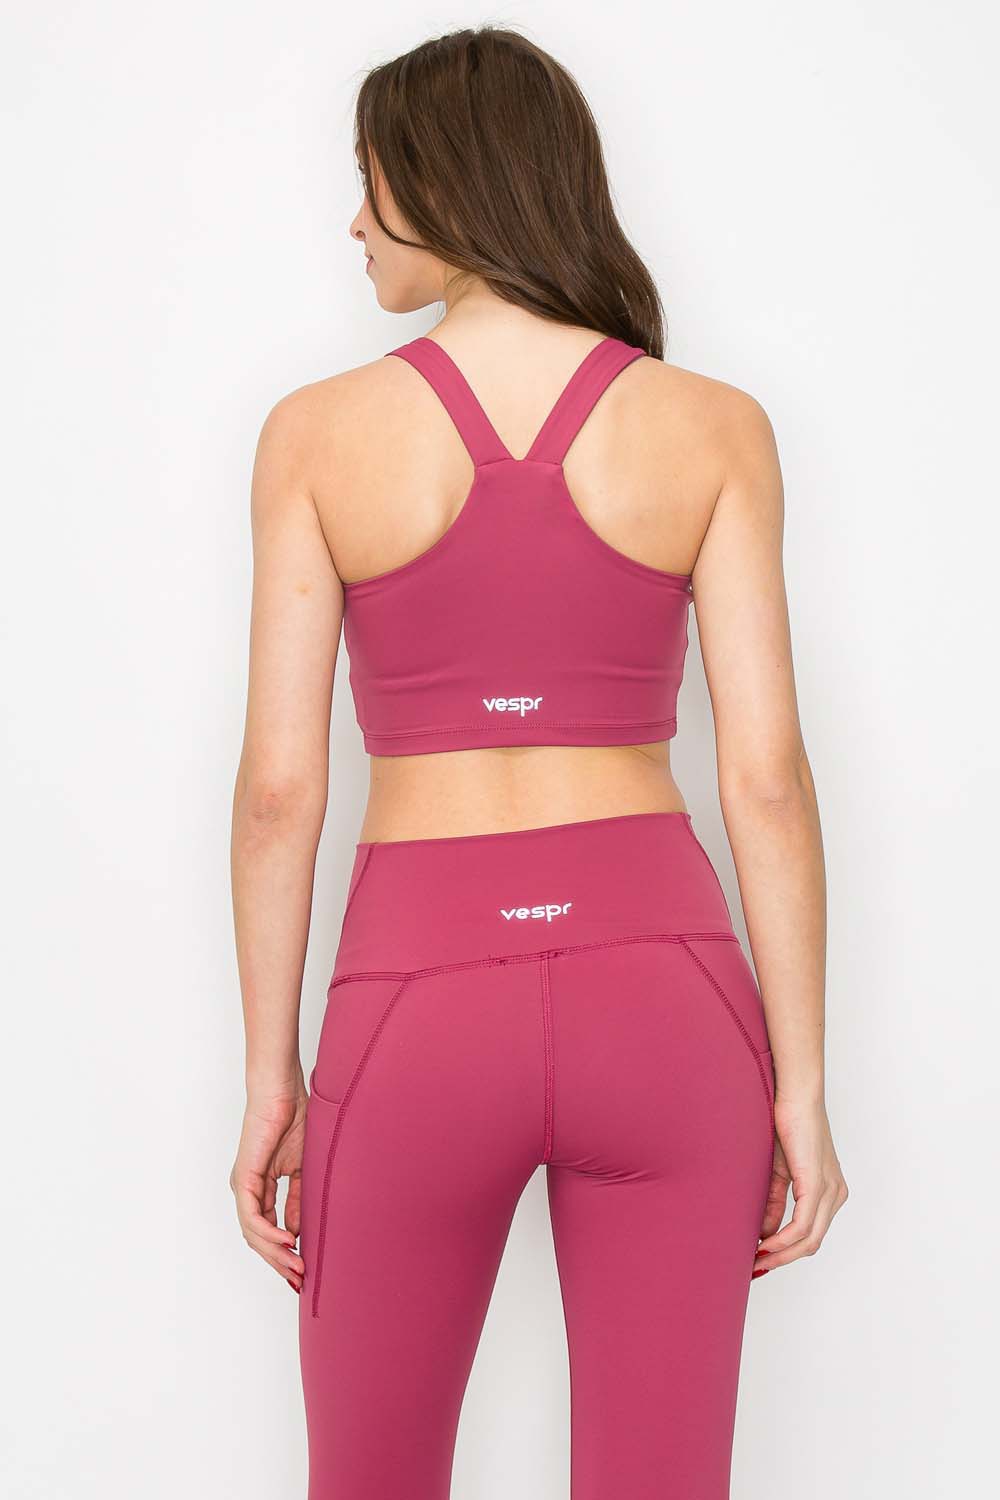 Full Support Yoga Bra Top - Cranberry Red - back